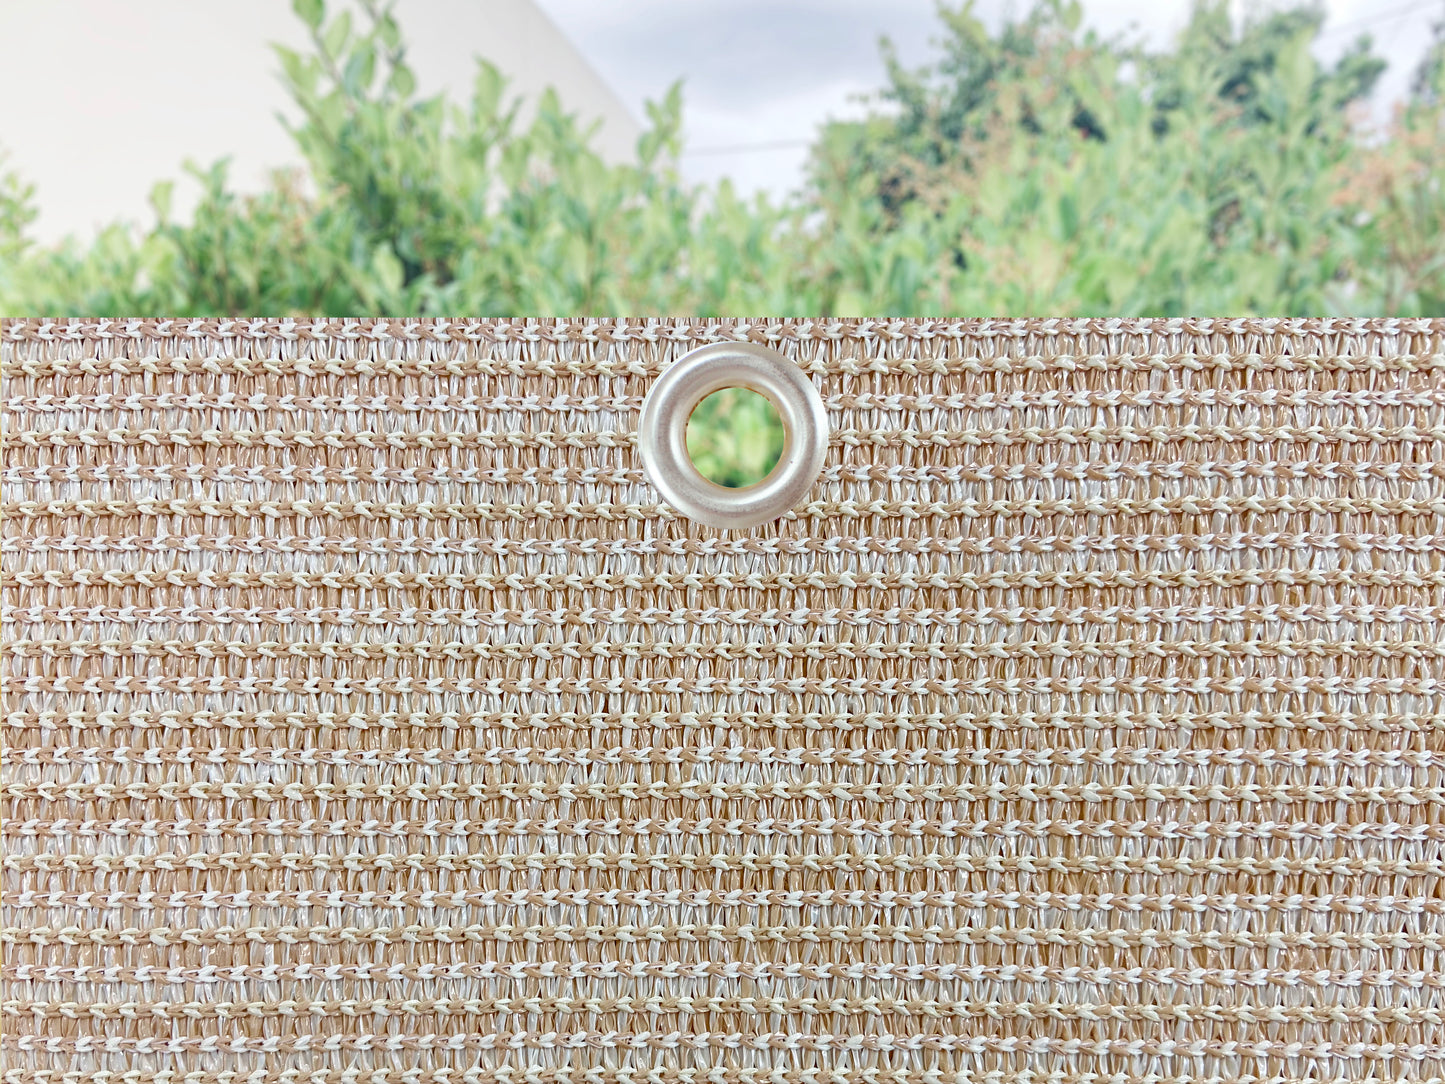 Commercial Balcony Windscreen Fence Privacy Screen Cover –Beige